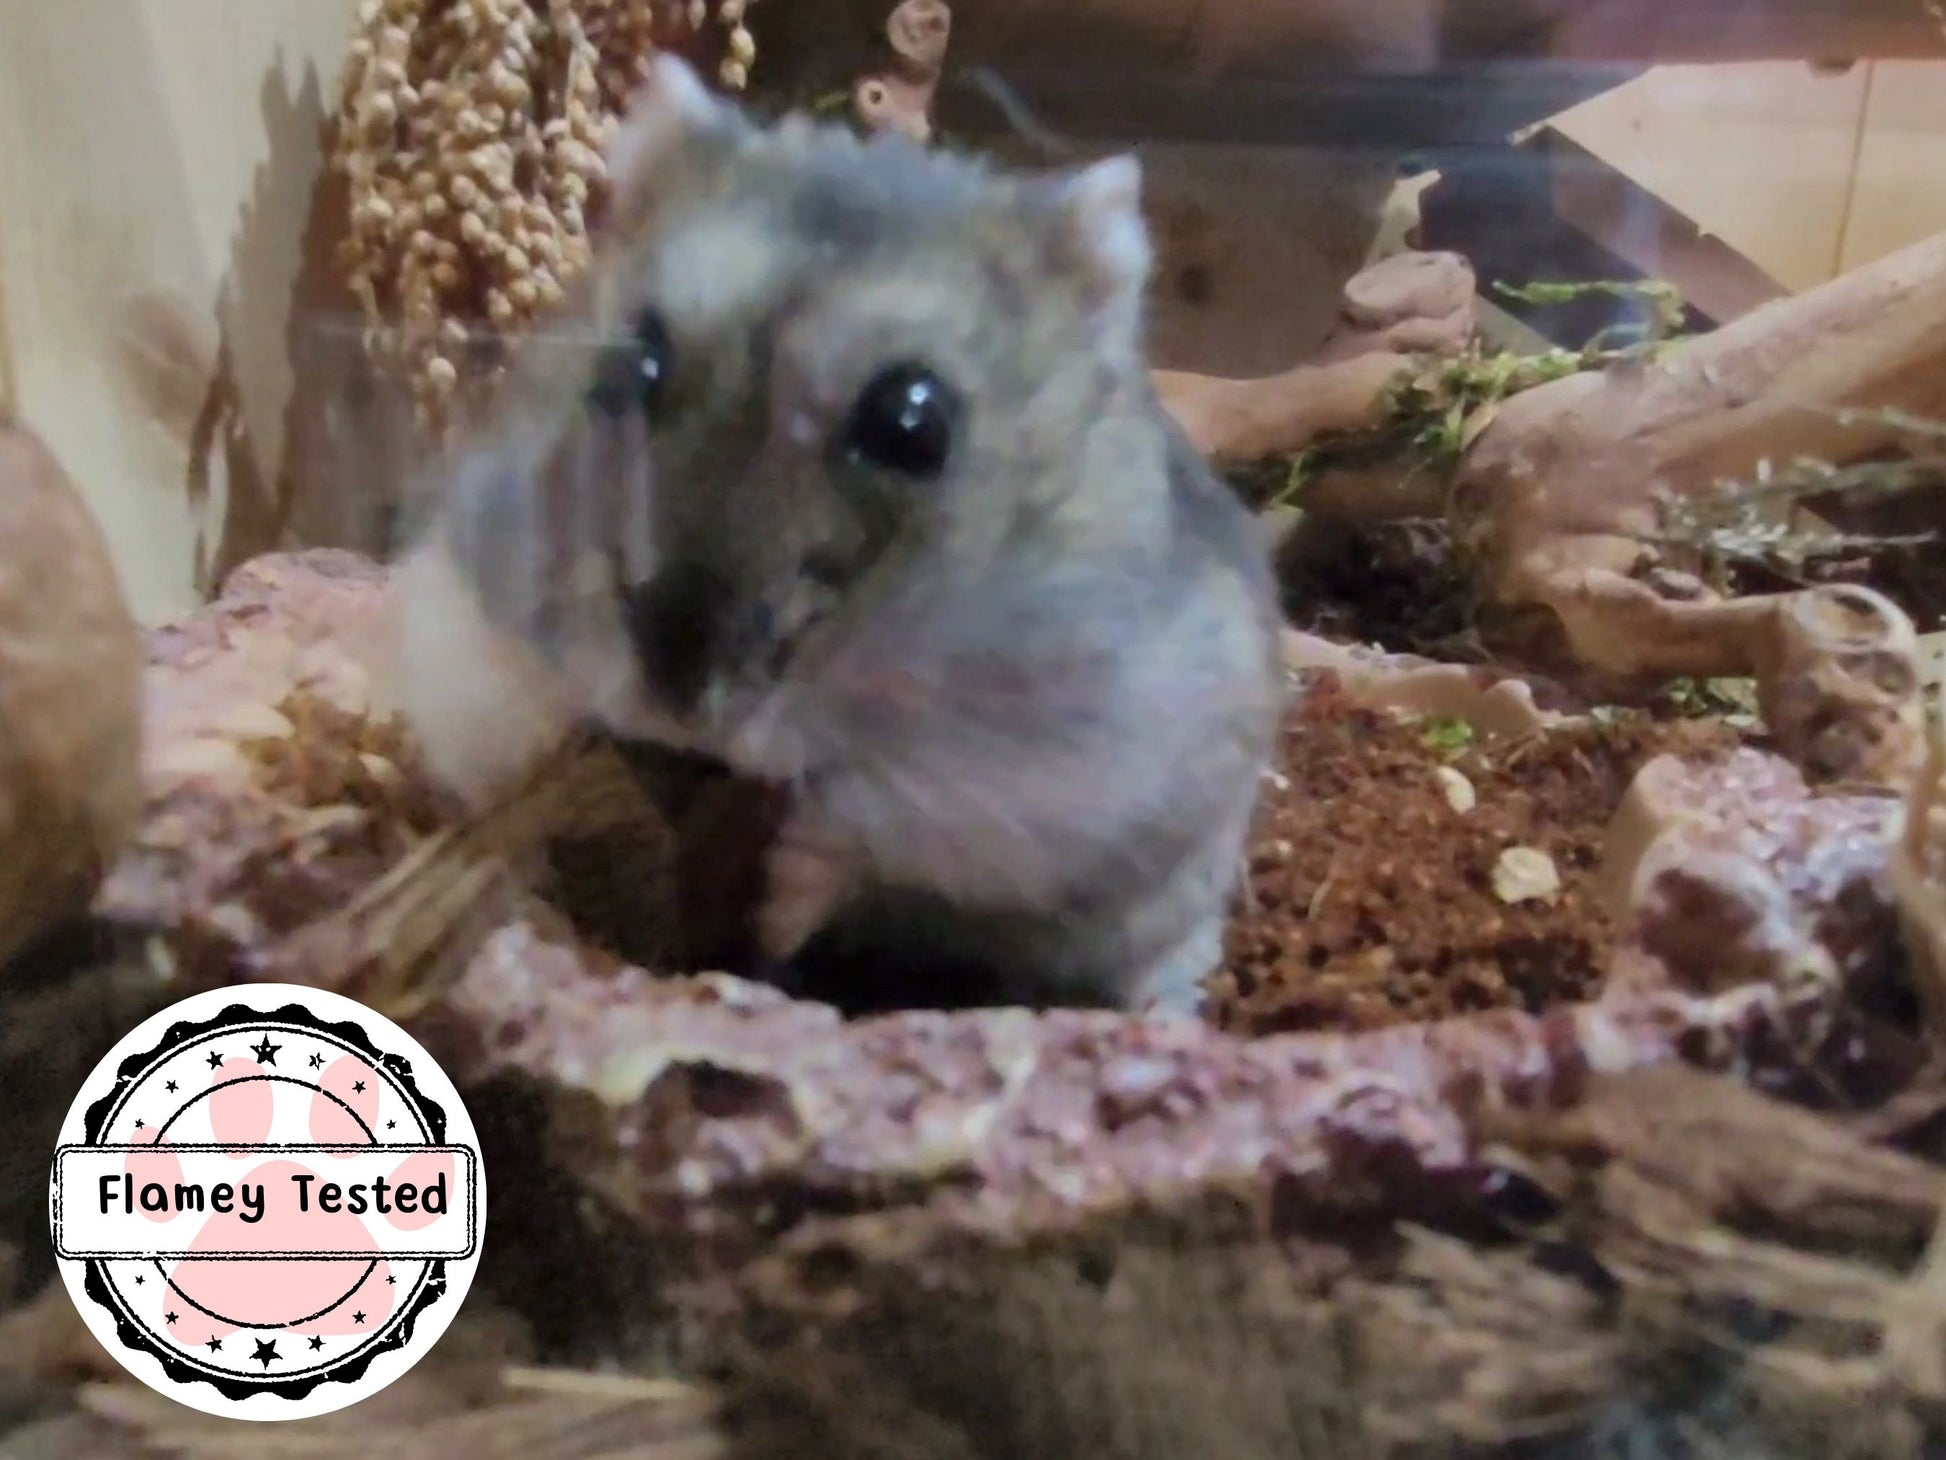 An adorable dwarf hamster sat in a bowl of soil chewing a coco chip